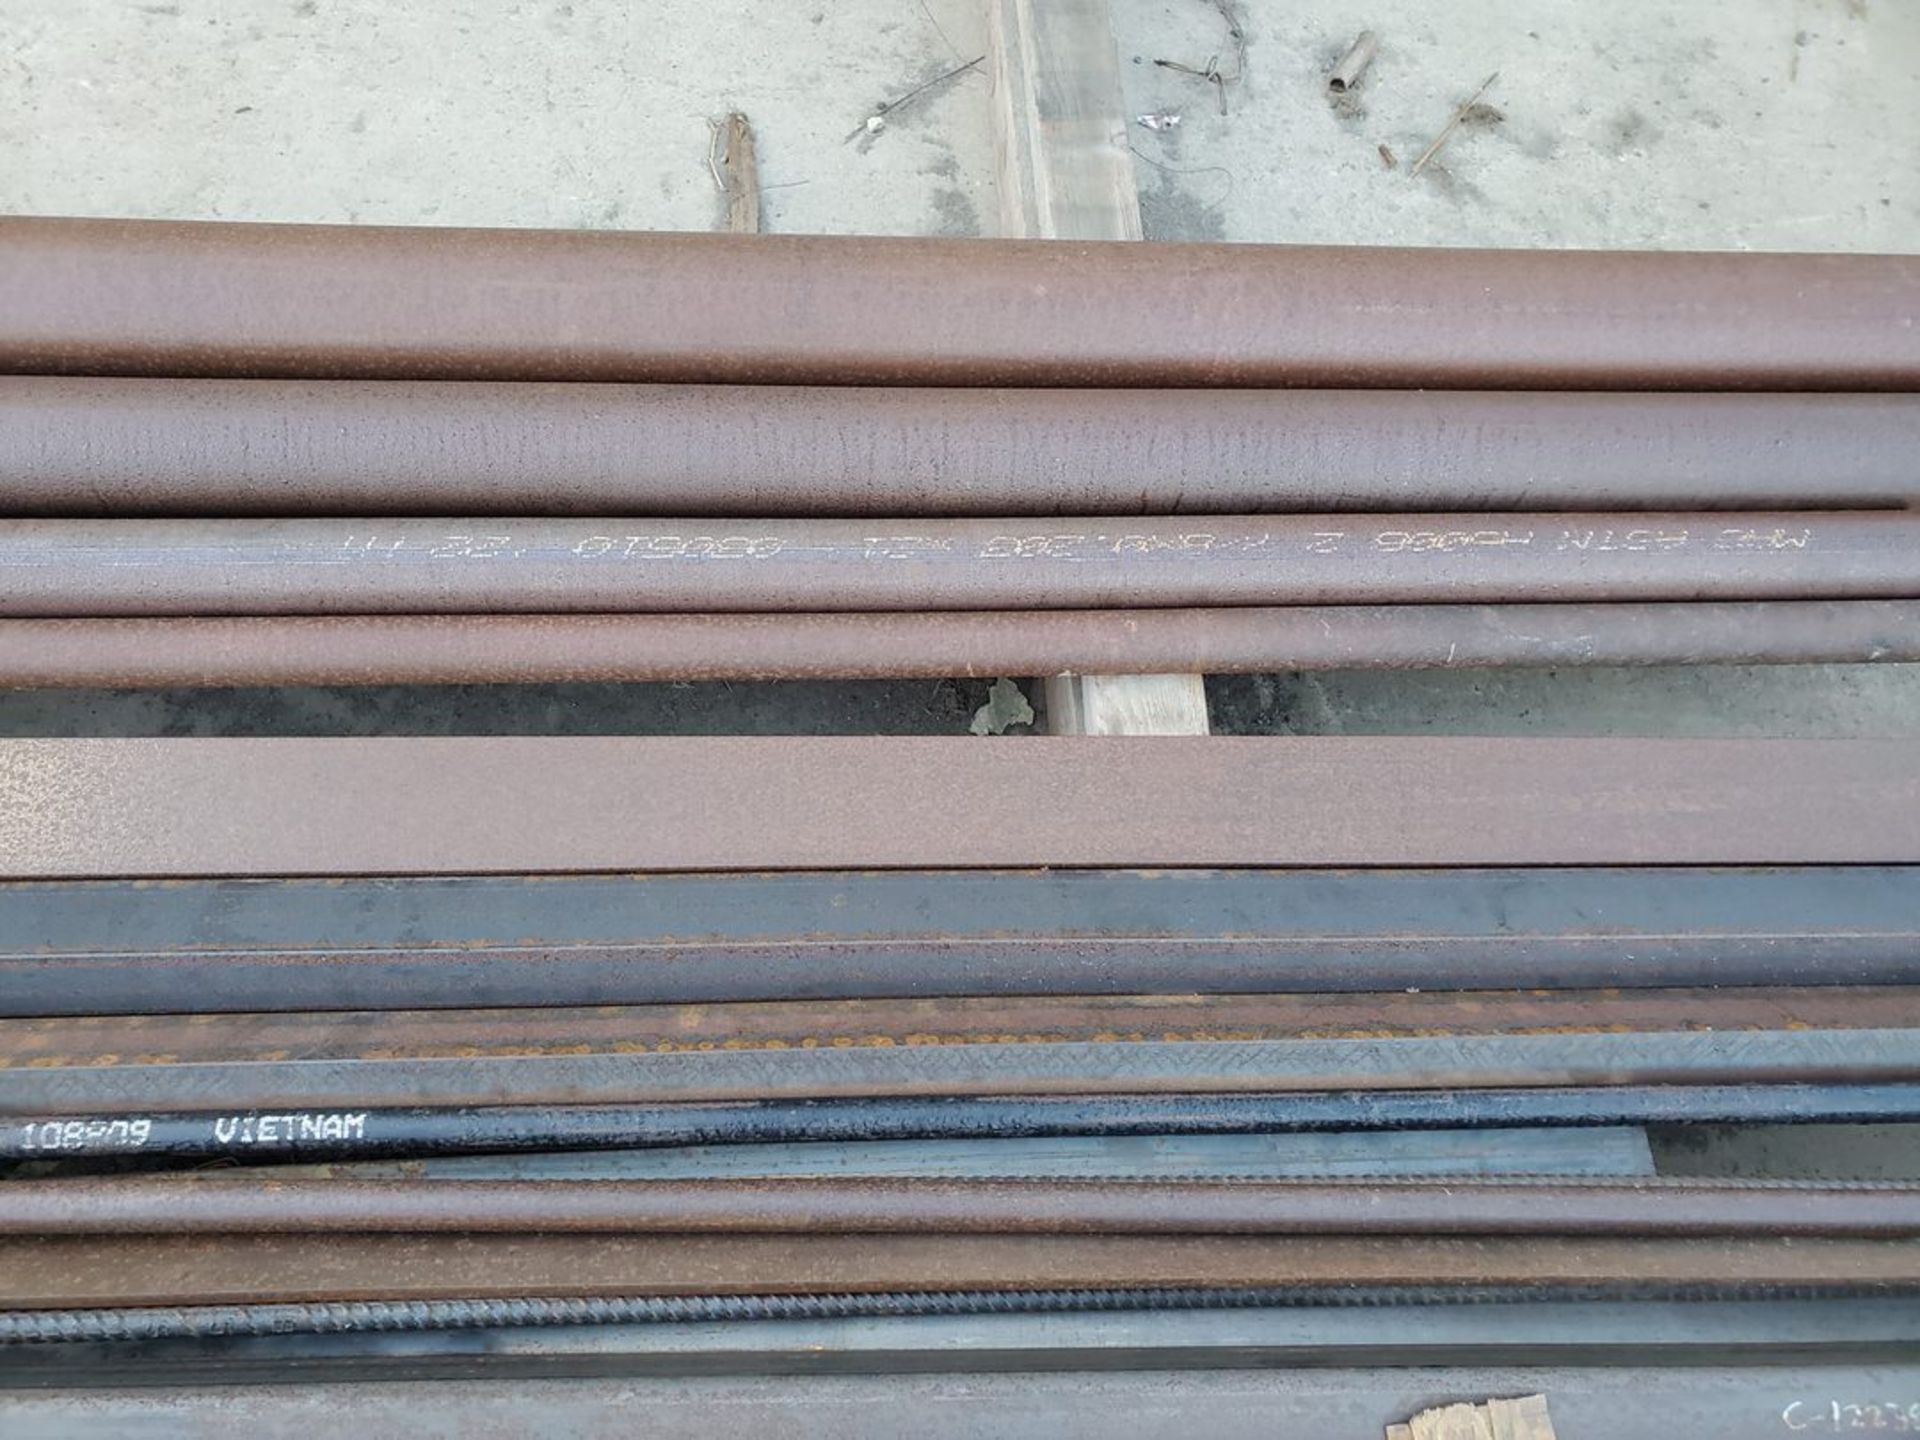 Assorted S/S Raw Matl. To Include But Not Limited To: Rebar, Pipe, Flat Bar, Angle, Sq. Tubing, Up - Image 10 of 14